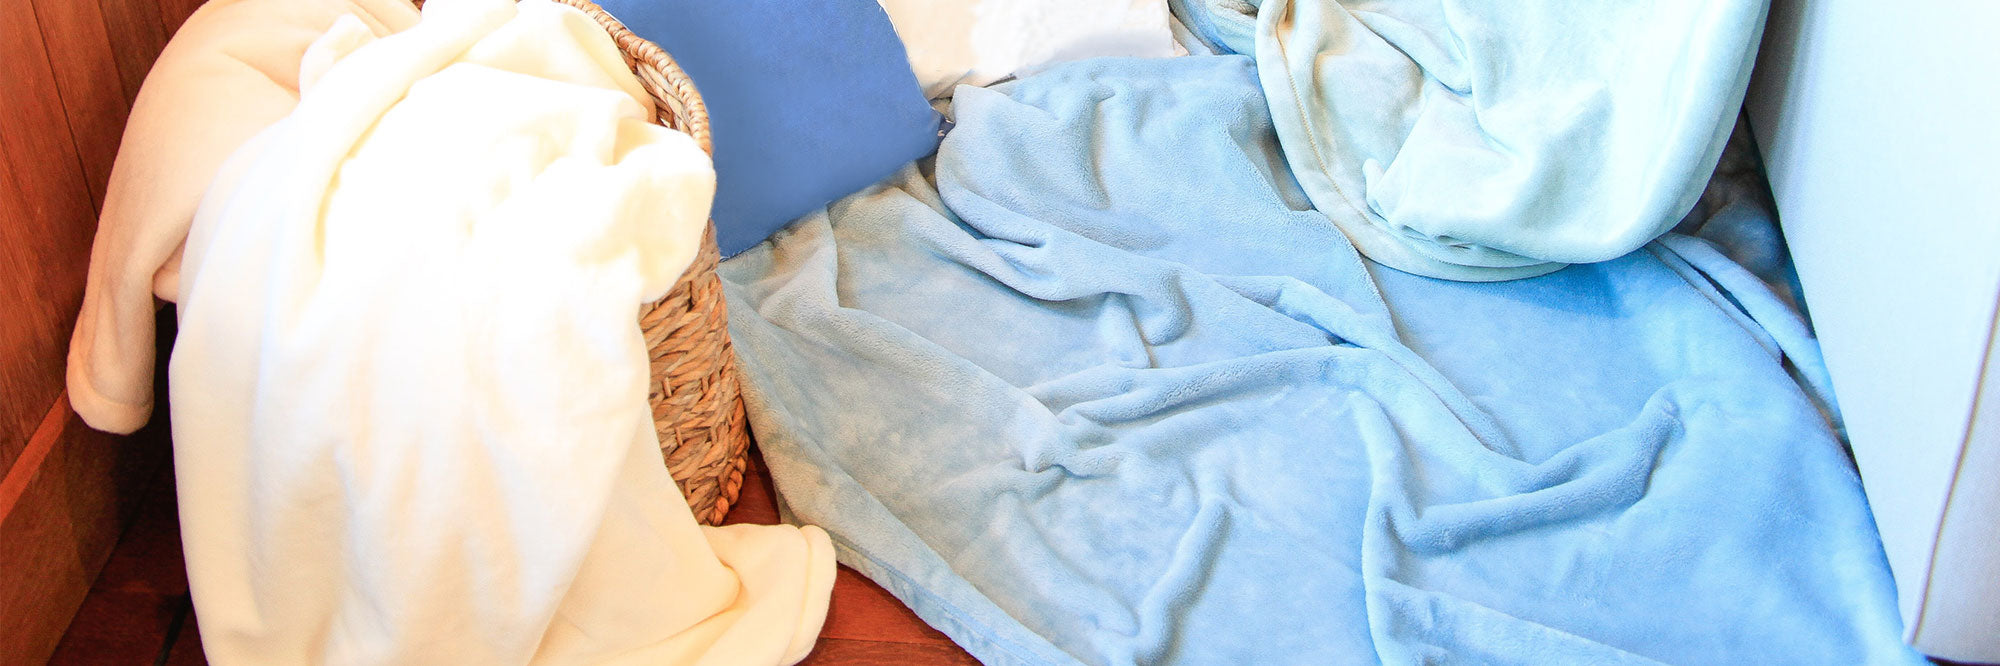 Fleece Blankets, Embracing Winter Warmth: The Soothing Comfort and